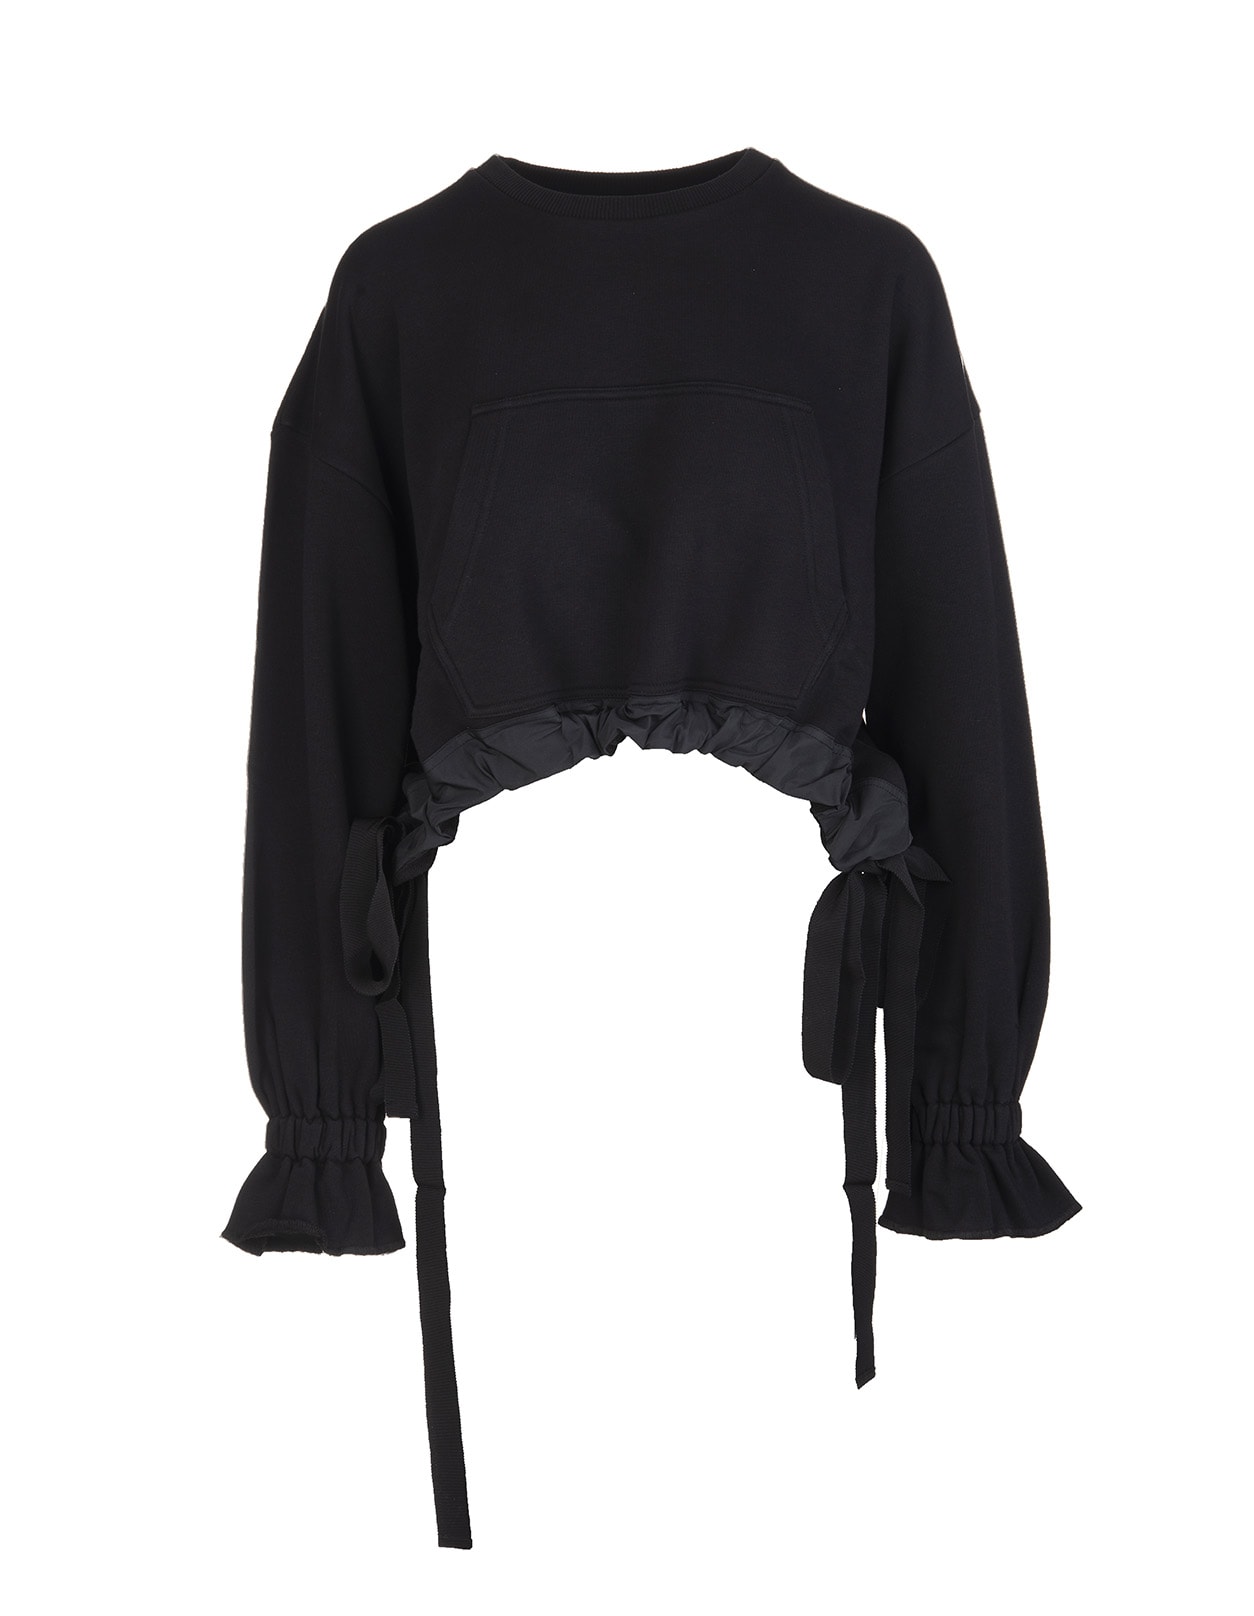 RED Valentino the Black Tag Sweatshirt With Gross Grain Ribbons